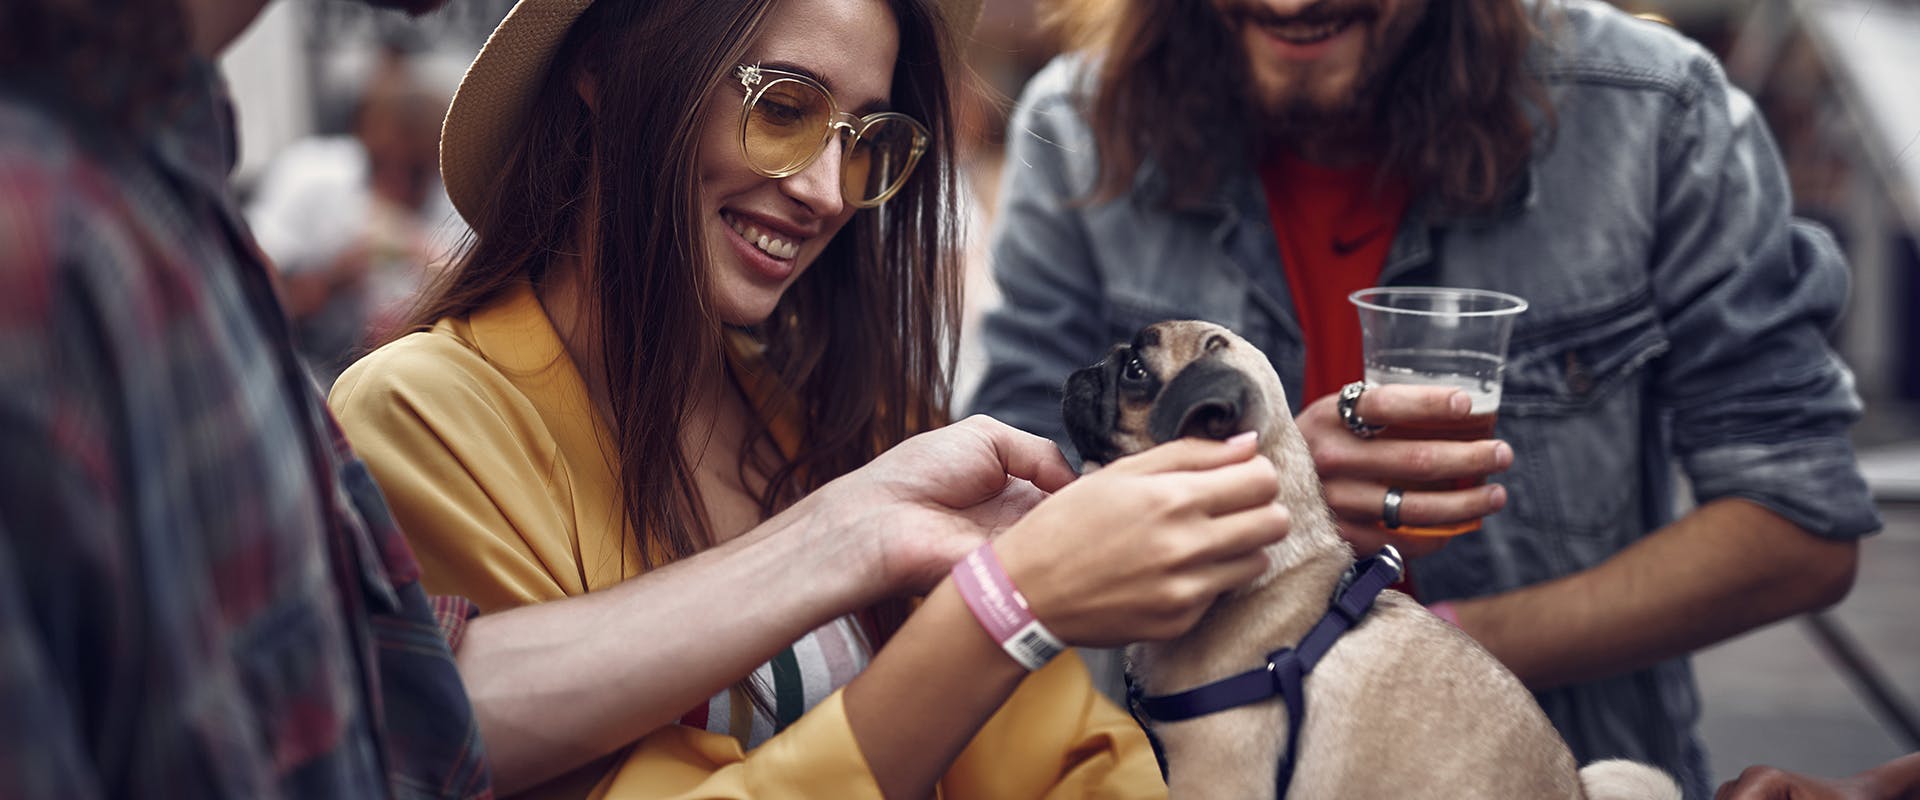 A group of people enjoying drinks and sitting outdoors at a restaurant, stroking a small pug puppy